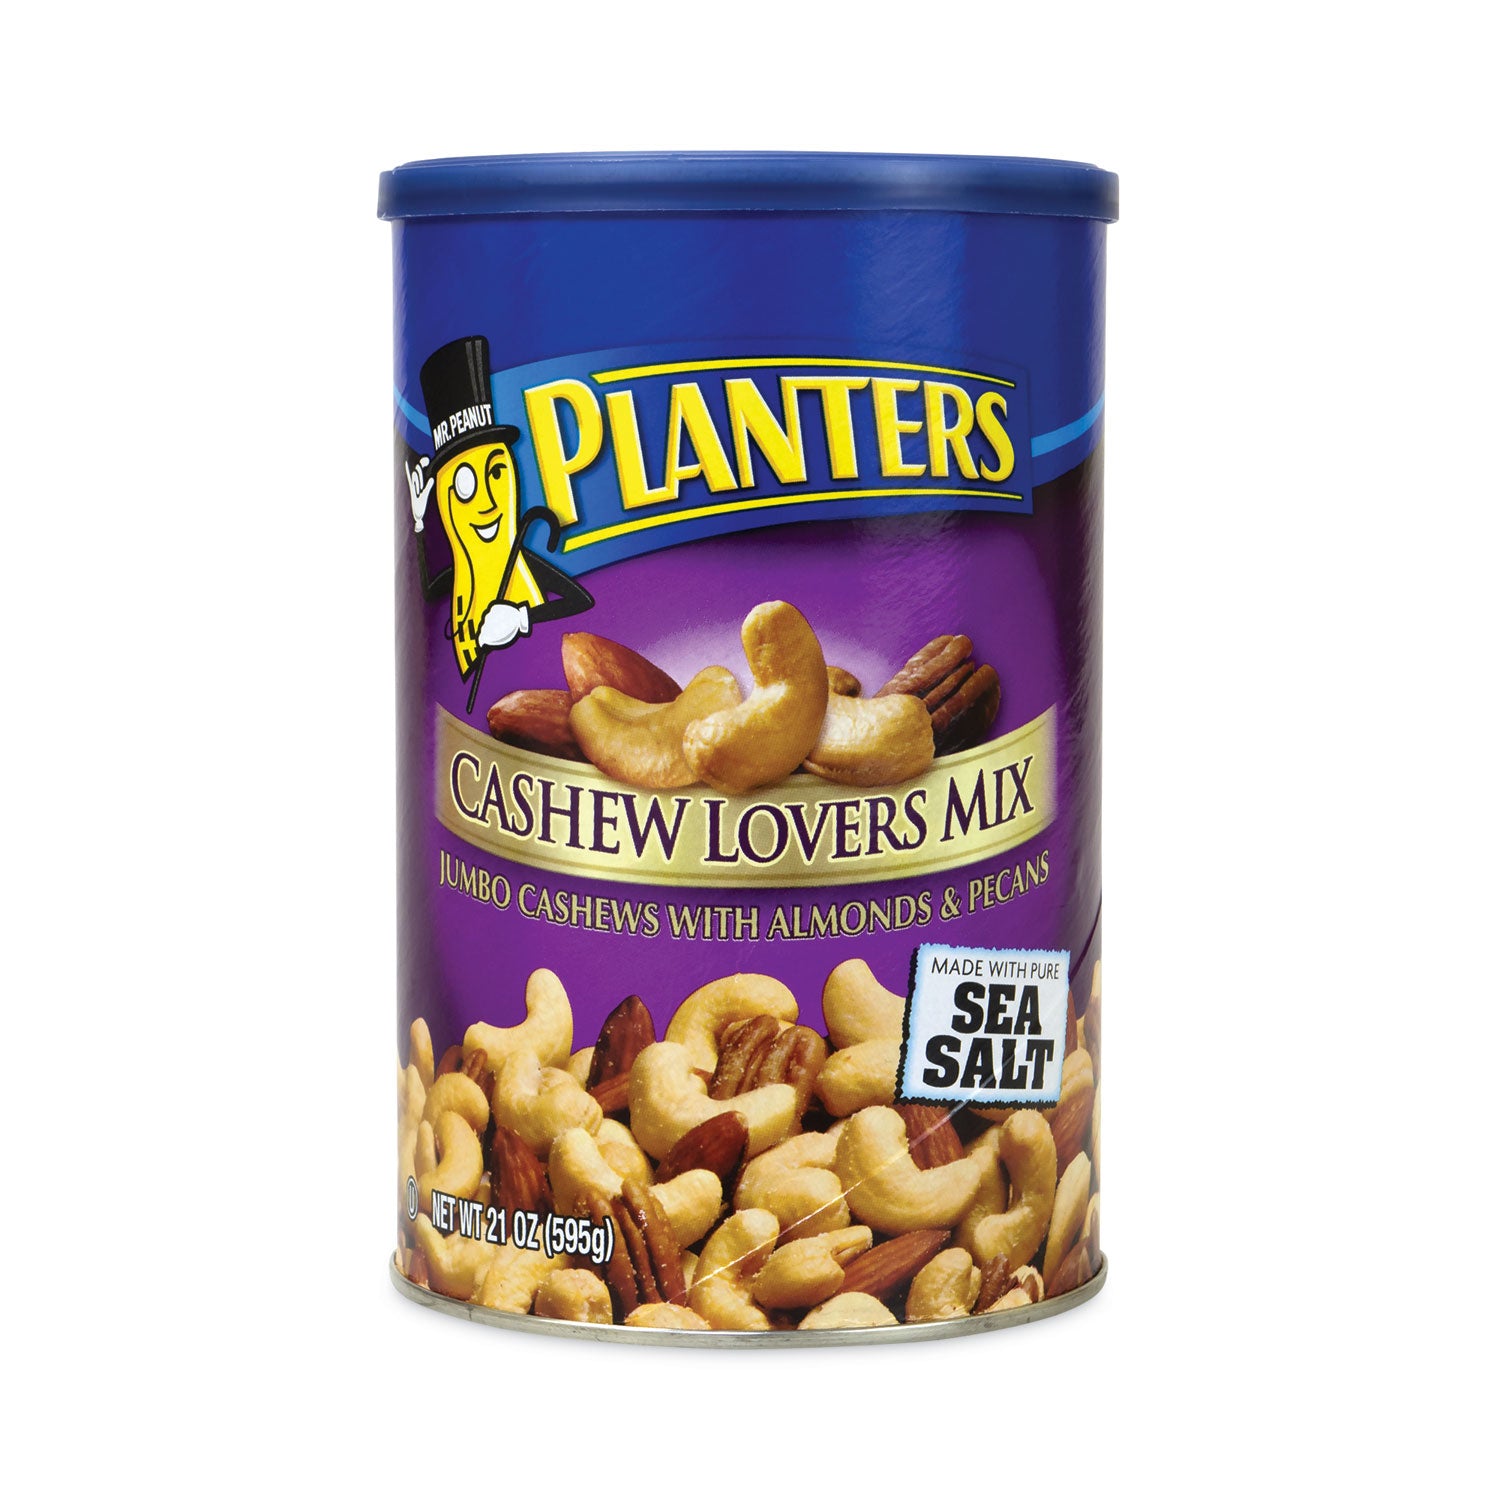 cashew-lovers-mix-21-oz-can-ships-in-1-3-business-days_grr22000886 - 1